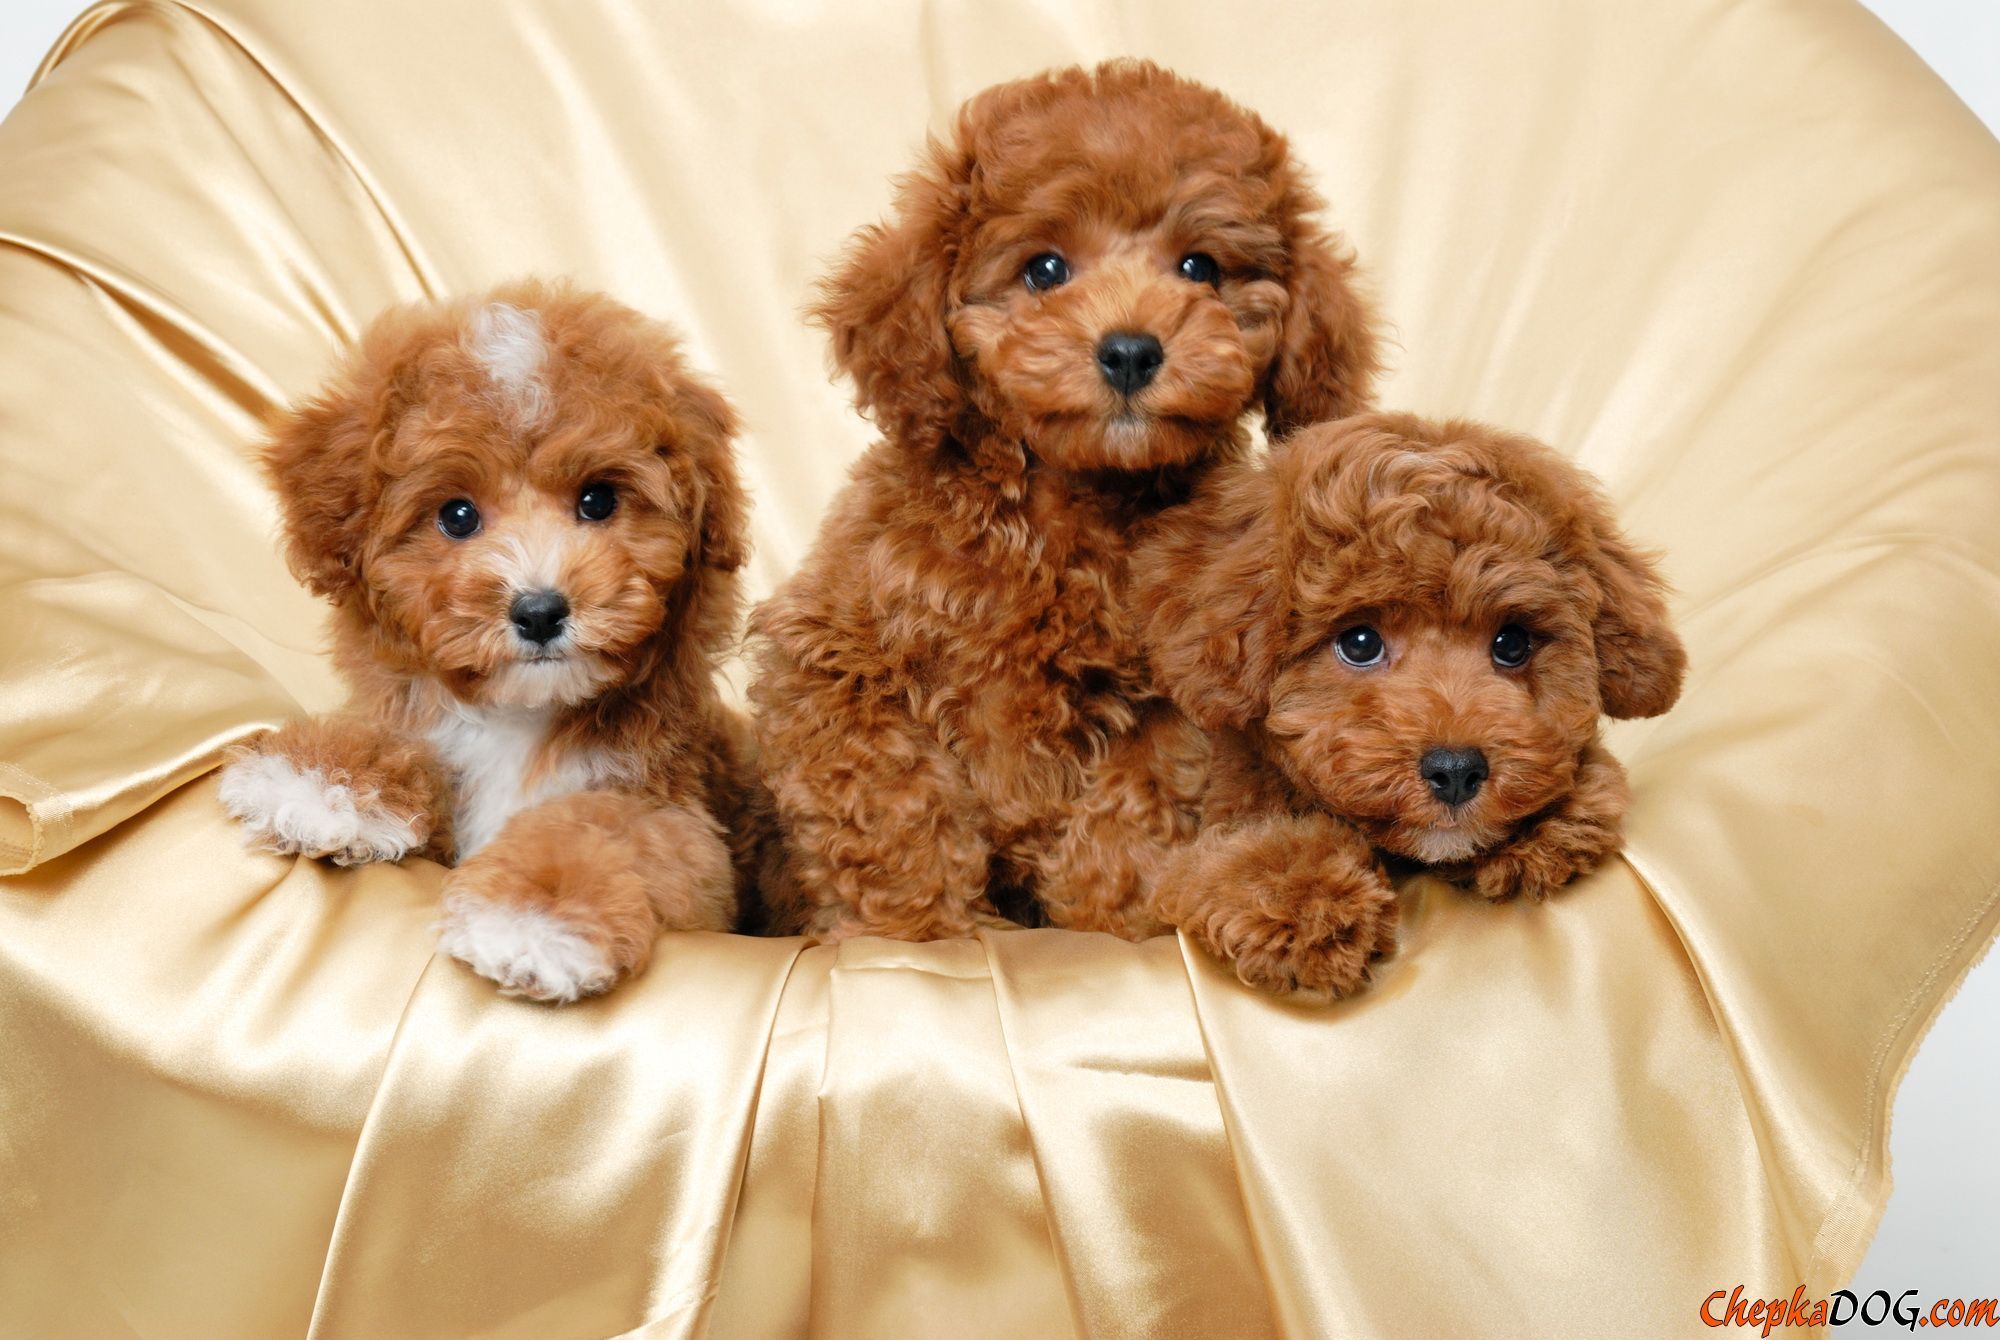 Most Beautiful Dog Photo Quality Photo. Cute Puppy Wallpaper, Puppies, Poodle Puppy